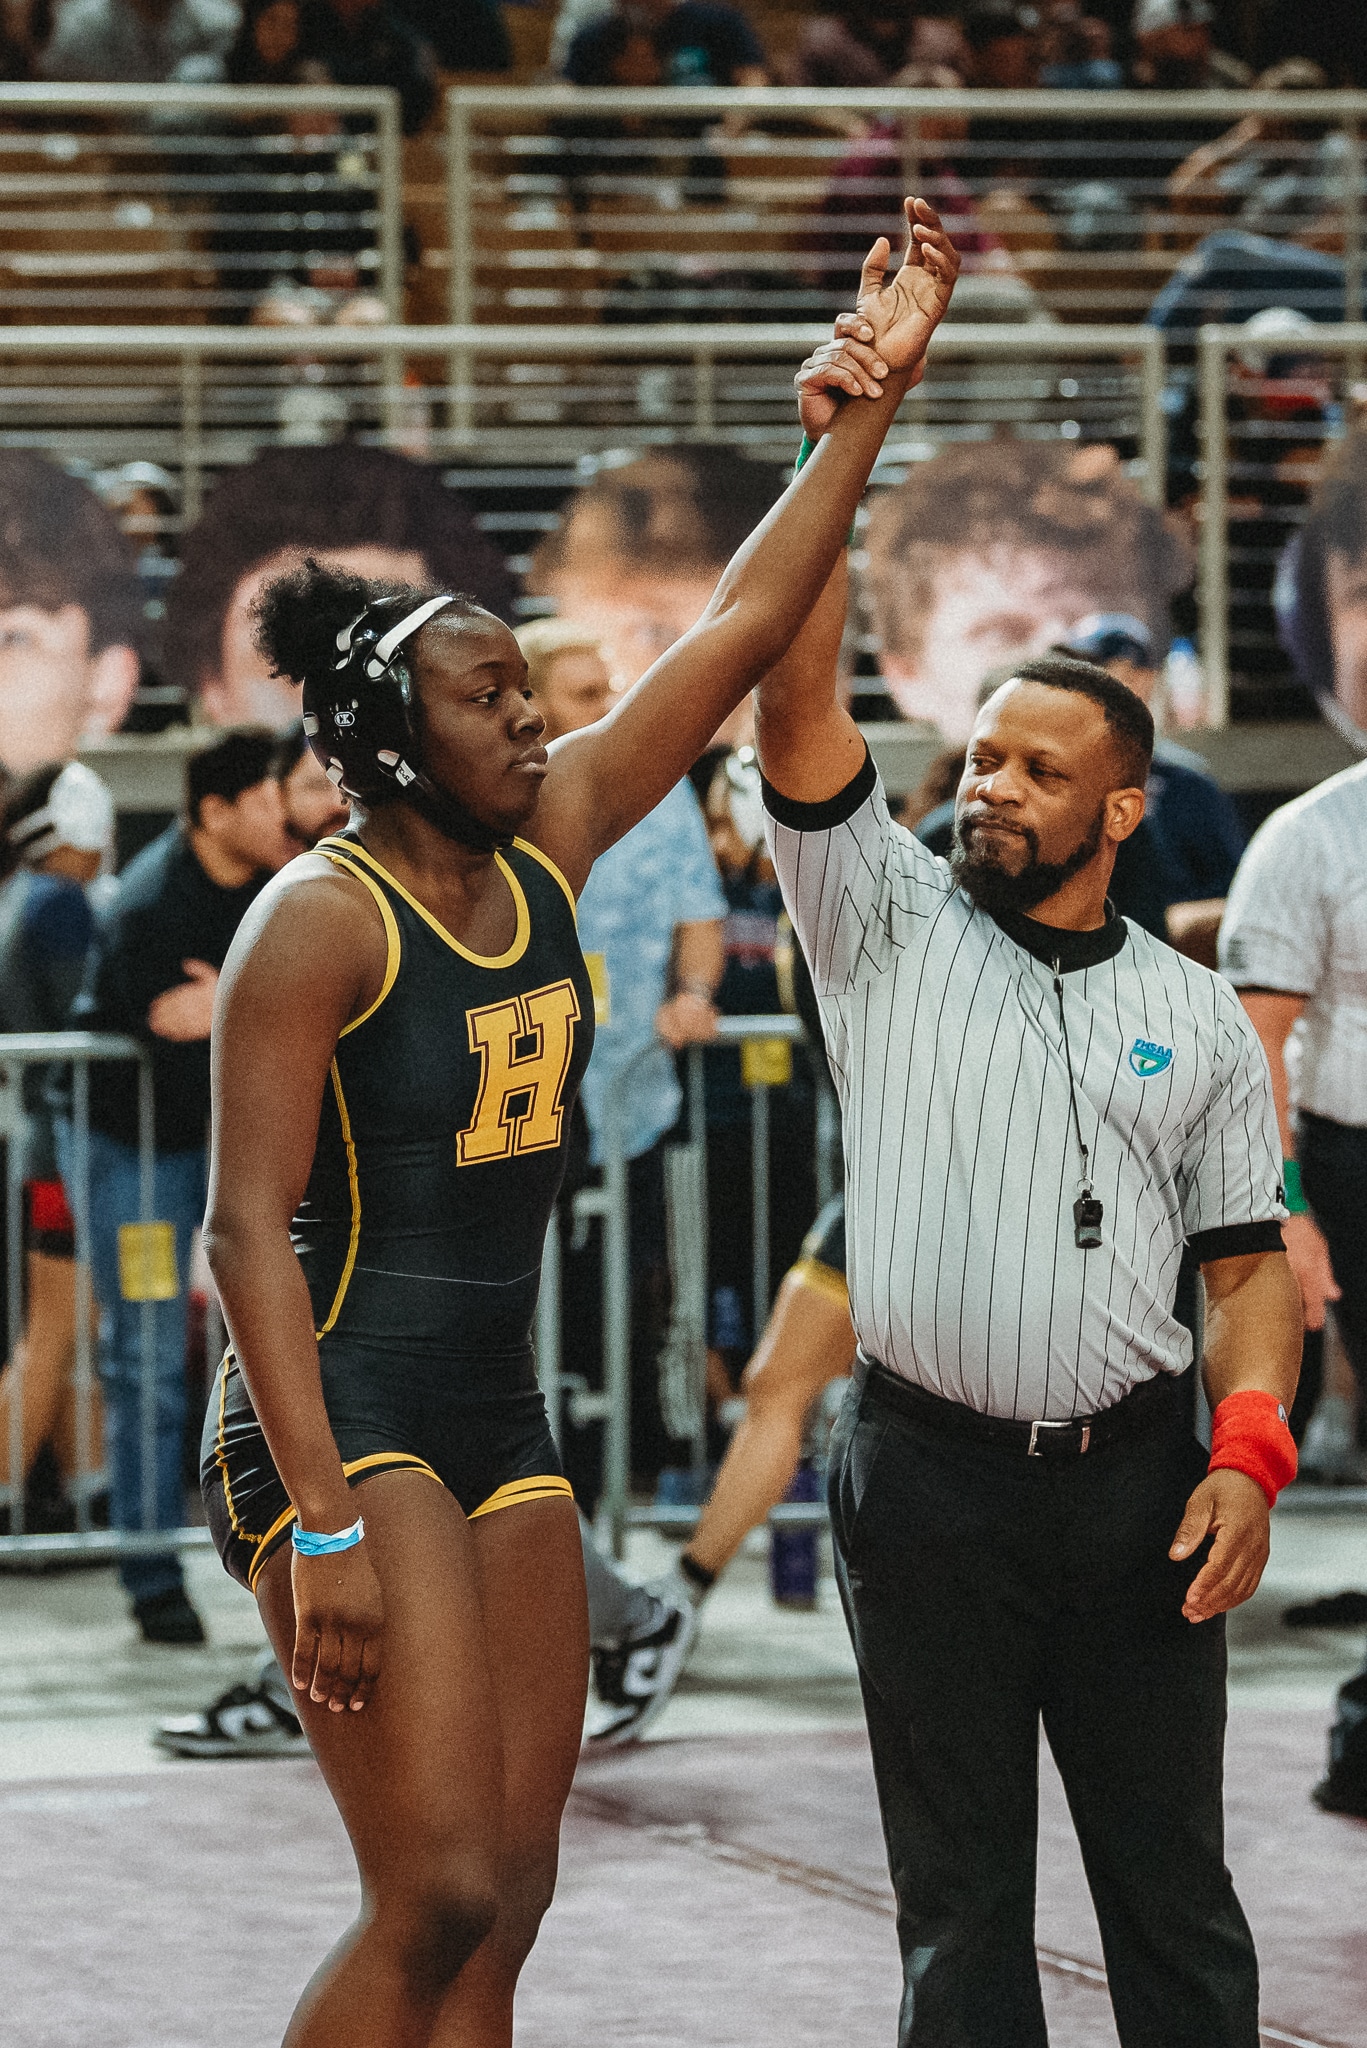 Makenzie Eltzroth gets her hand raised at the FHSAA State Wrestling Championship. [Credit: Cynthia Leota]